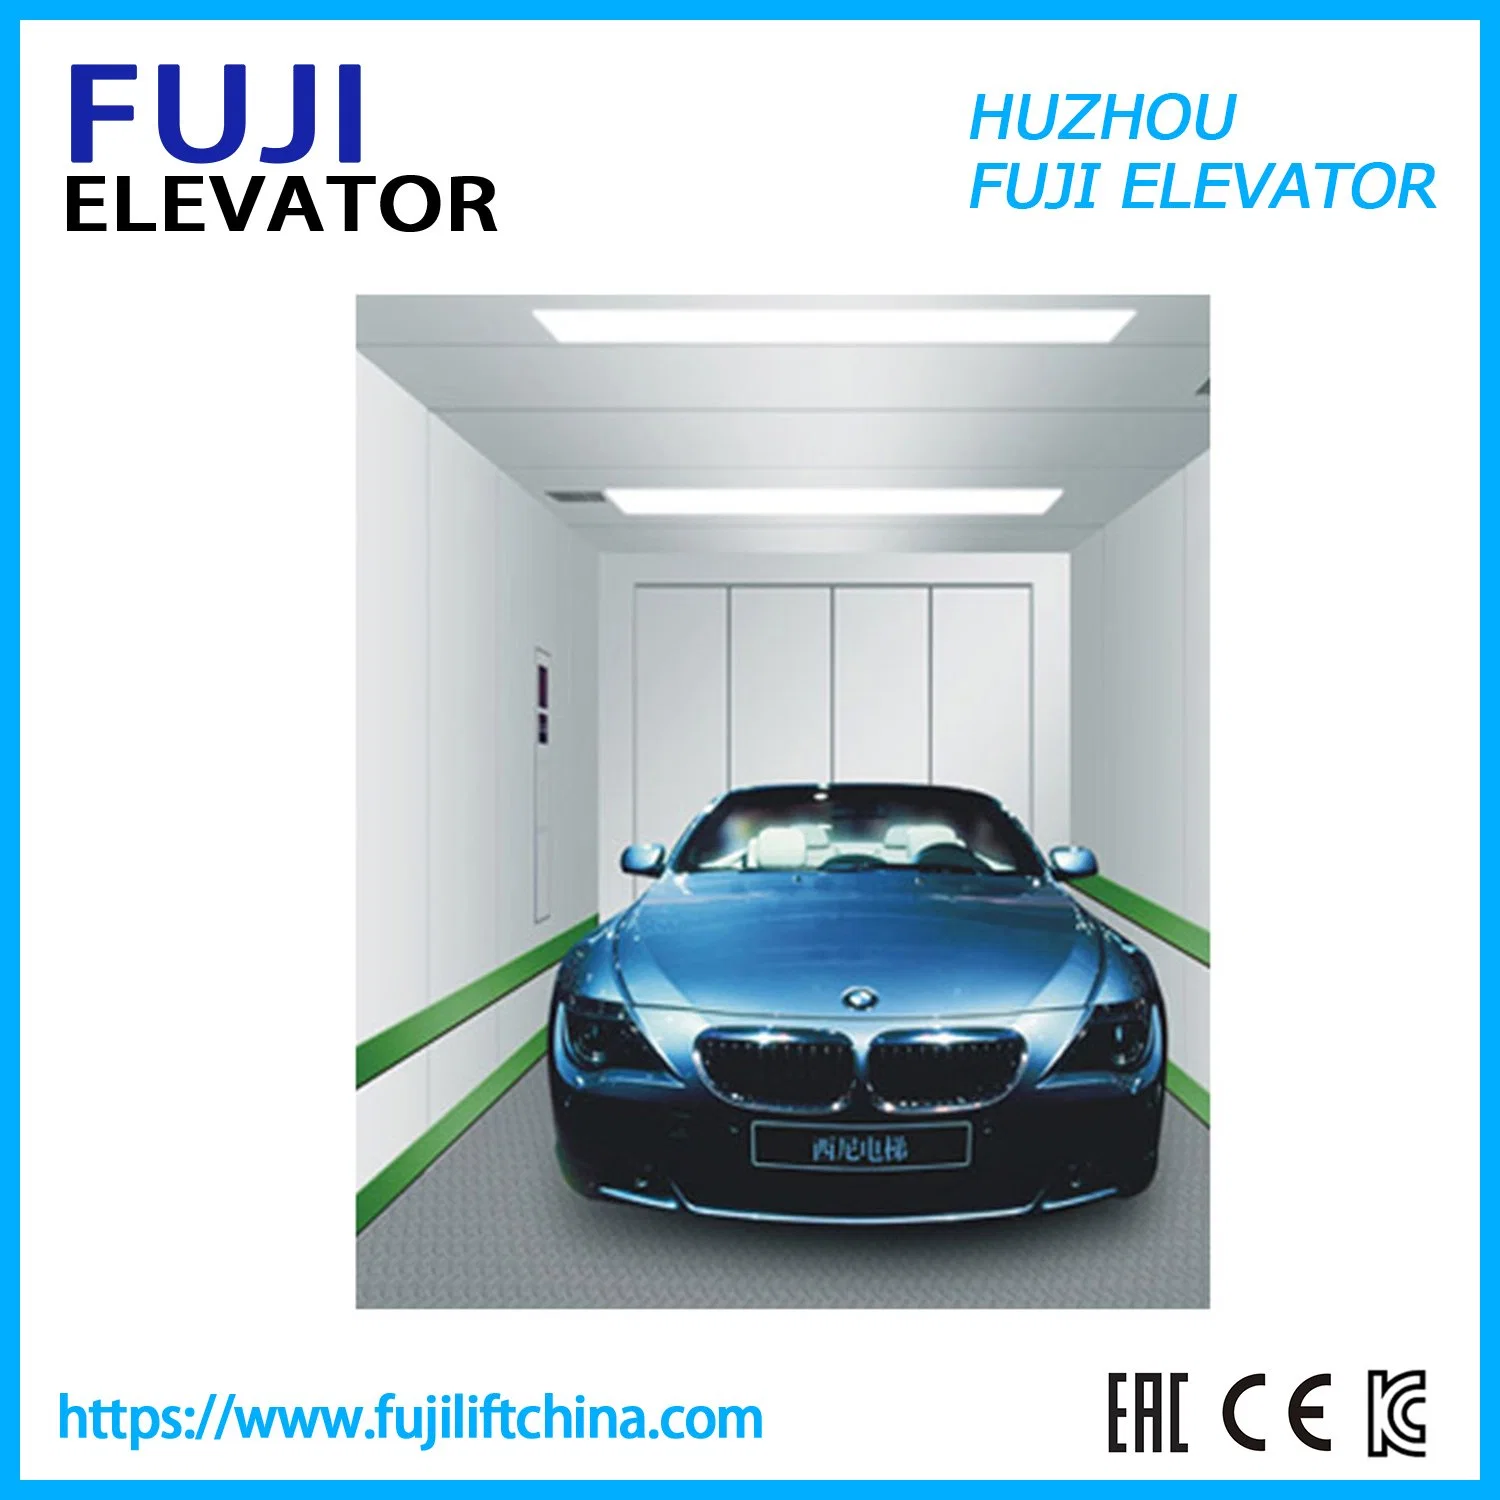 FUJI Car Lift Freight Elevator Goods Elevator Car Elevator with Good Price From Original Factory Manufacturer Vvvf Control